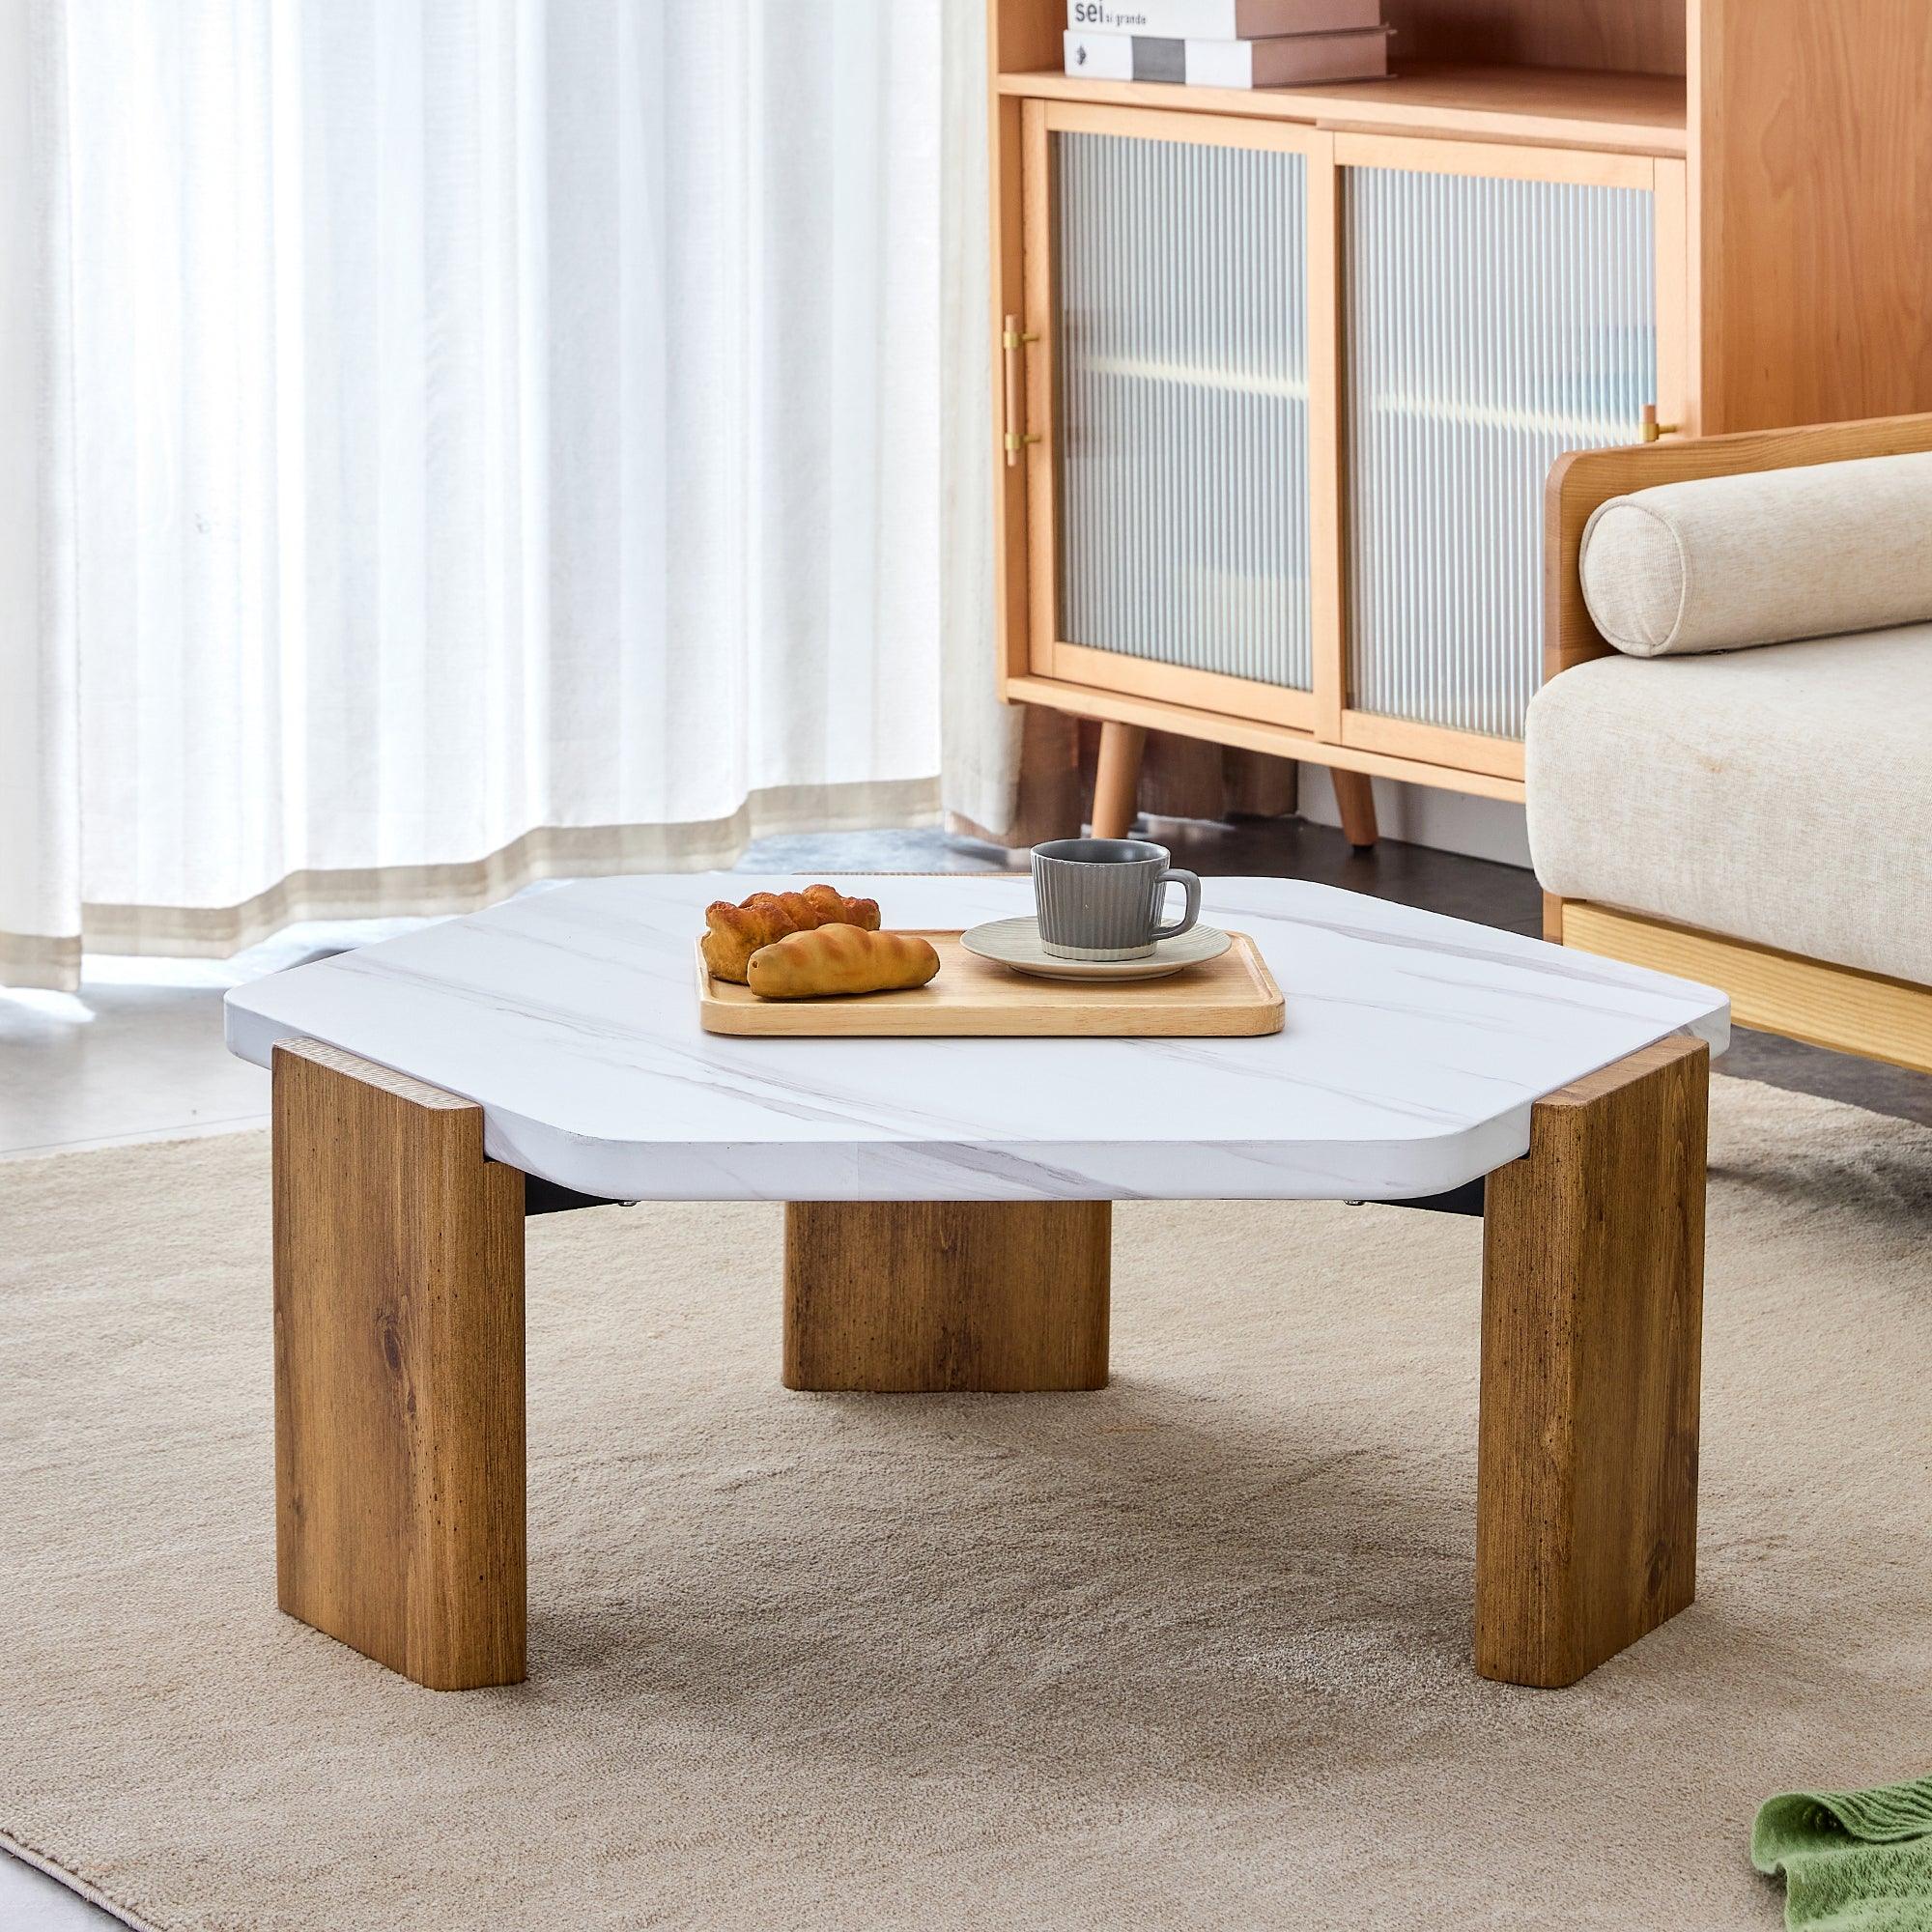 🆓🚛 Modern Practical Mdf Coffee Table With White Tabletop & Wooden Toned Legs Suitable for Living Rooms & Guest Rooms.